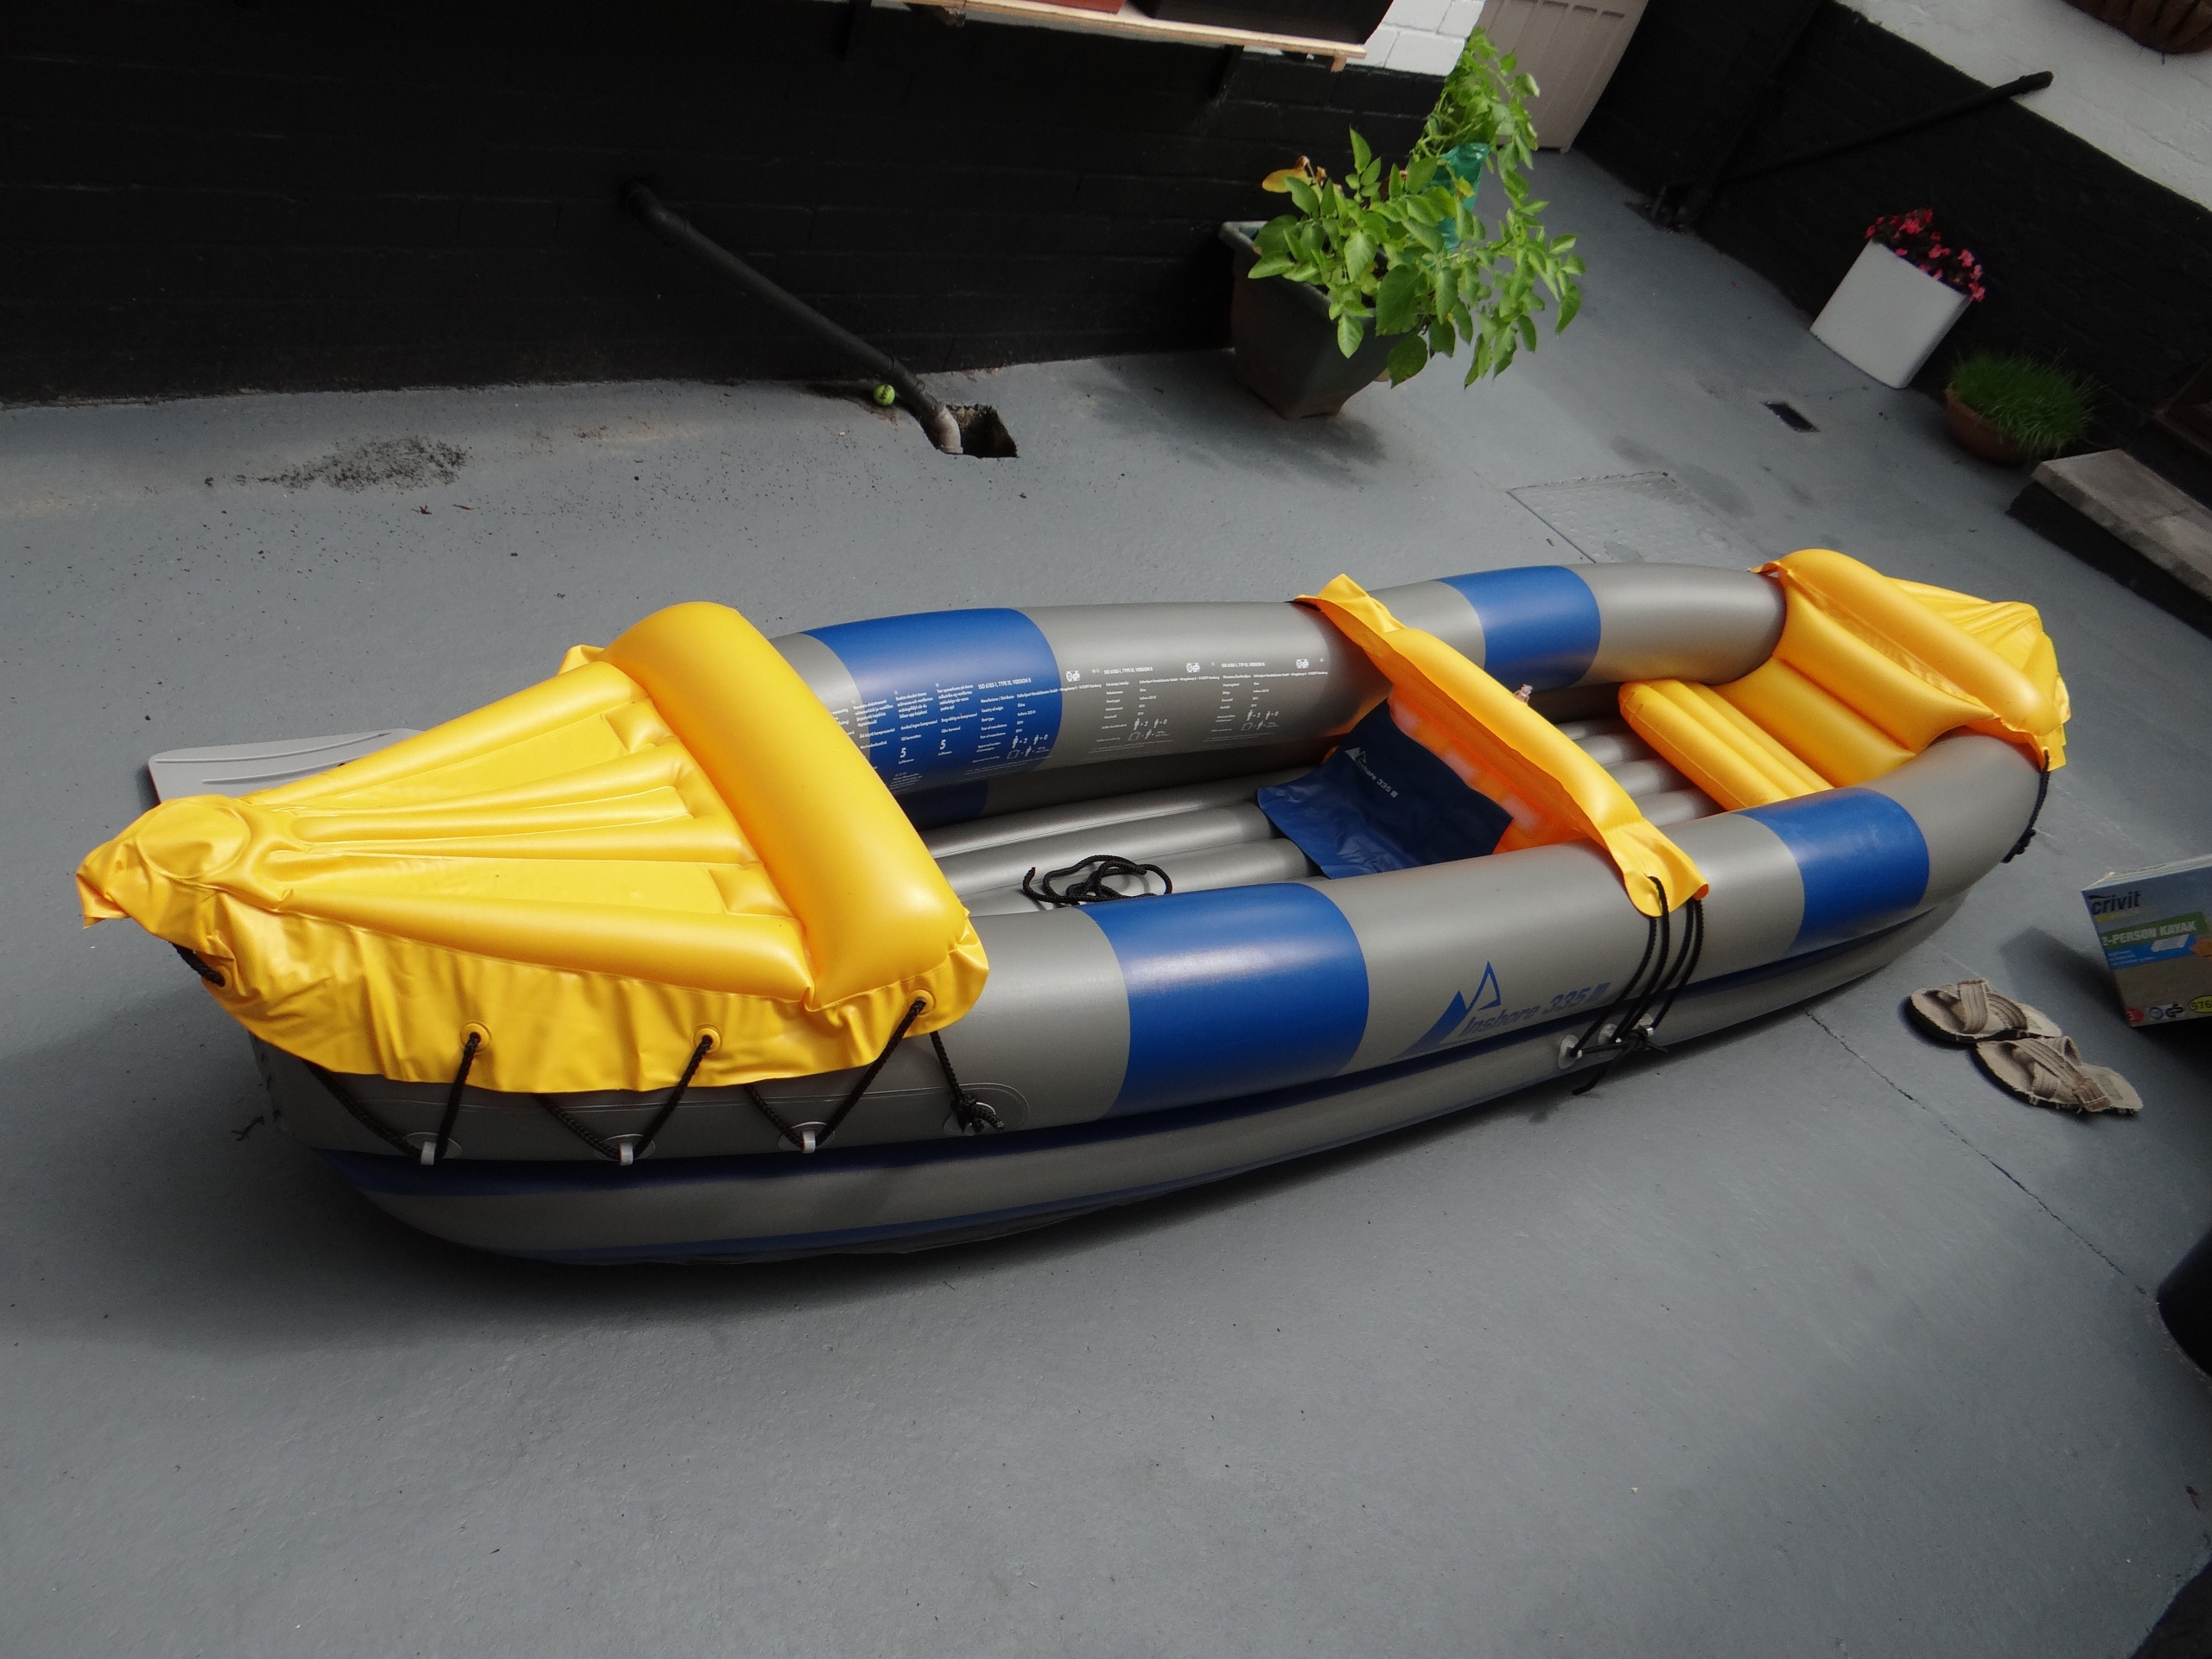 Ready for the Fjords! Crivit 2 Person Kayak £39.99 from Lidl - Our